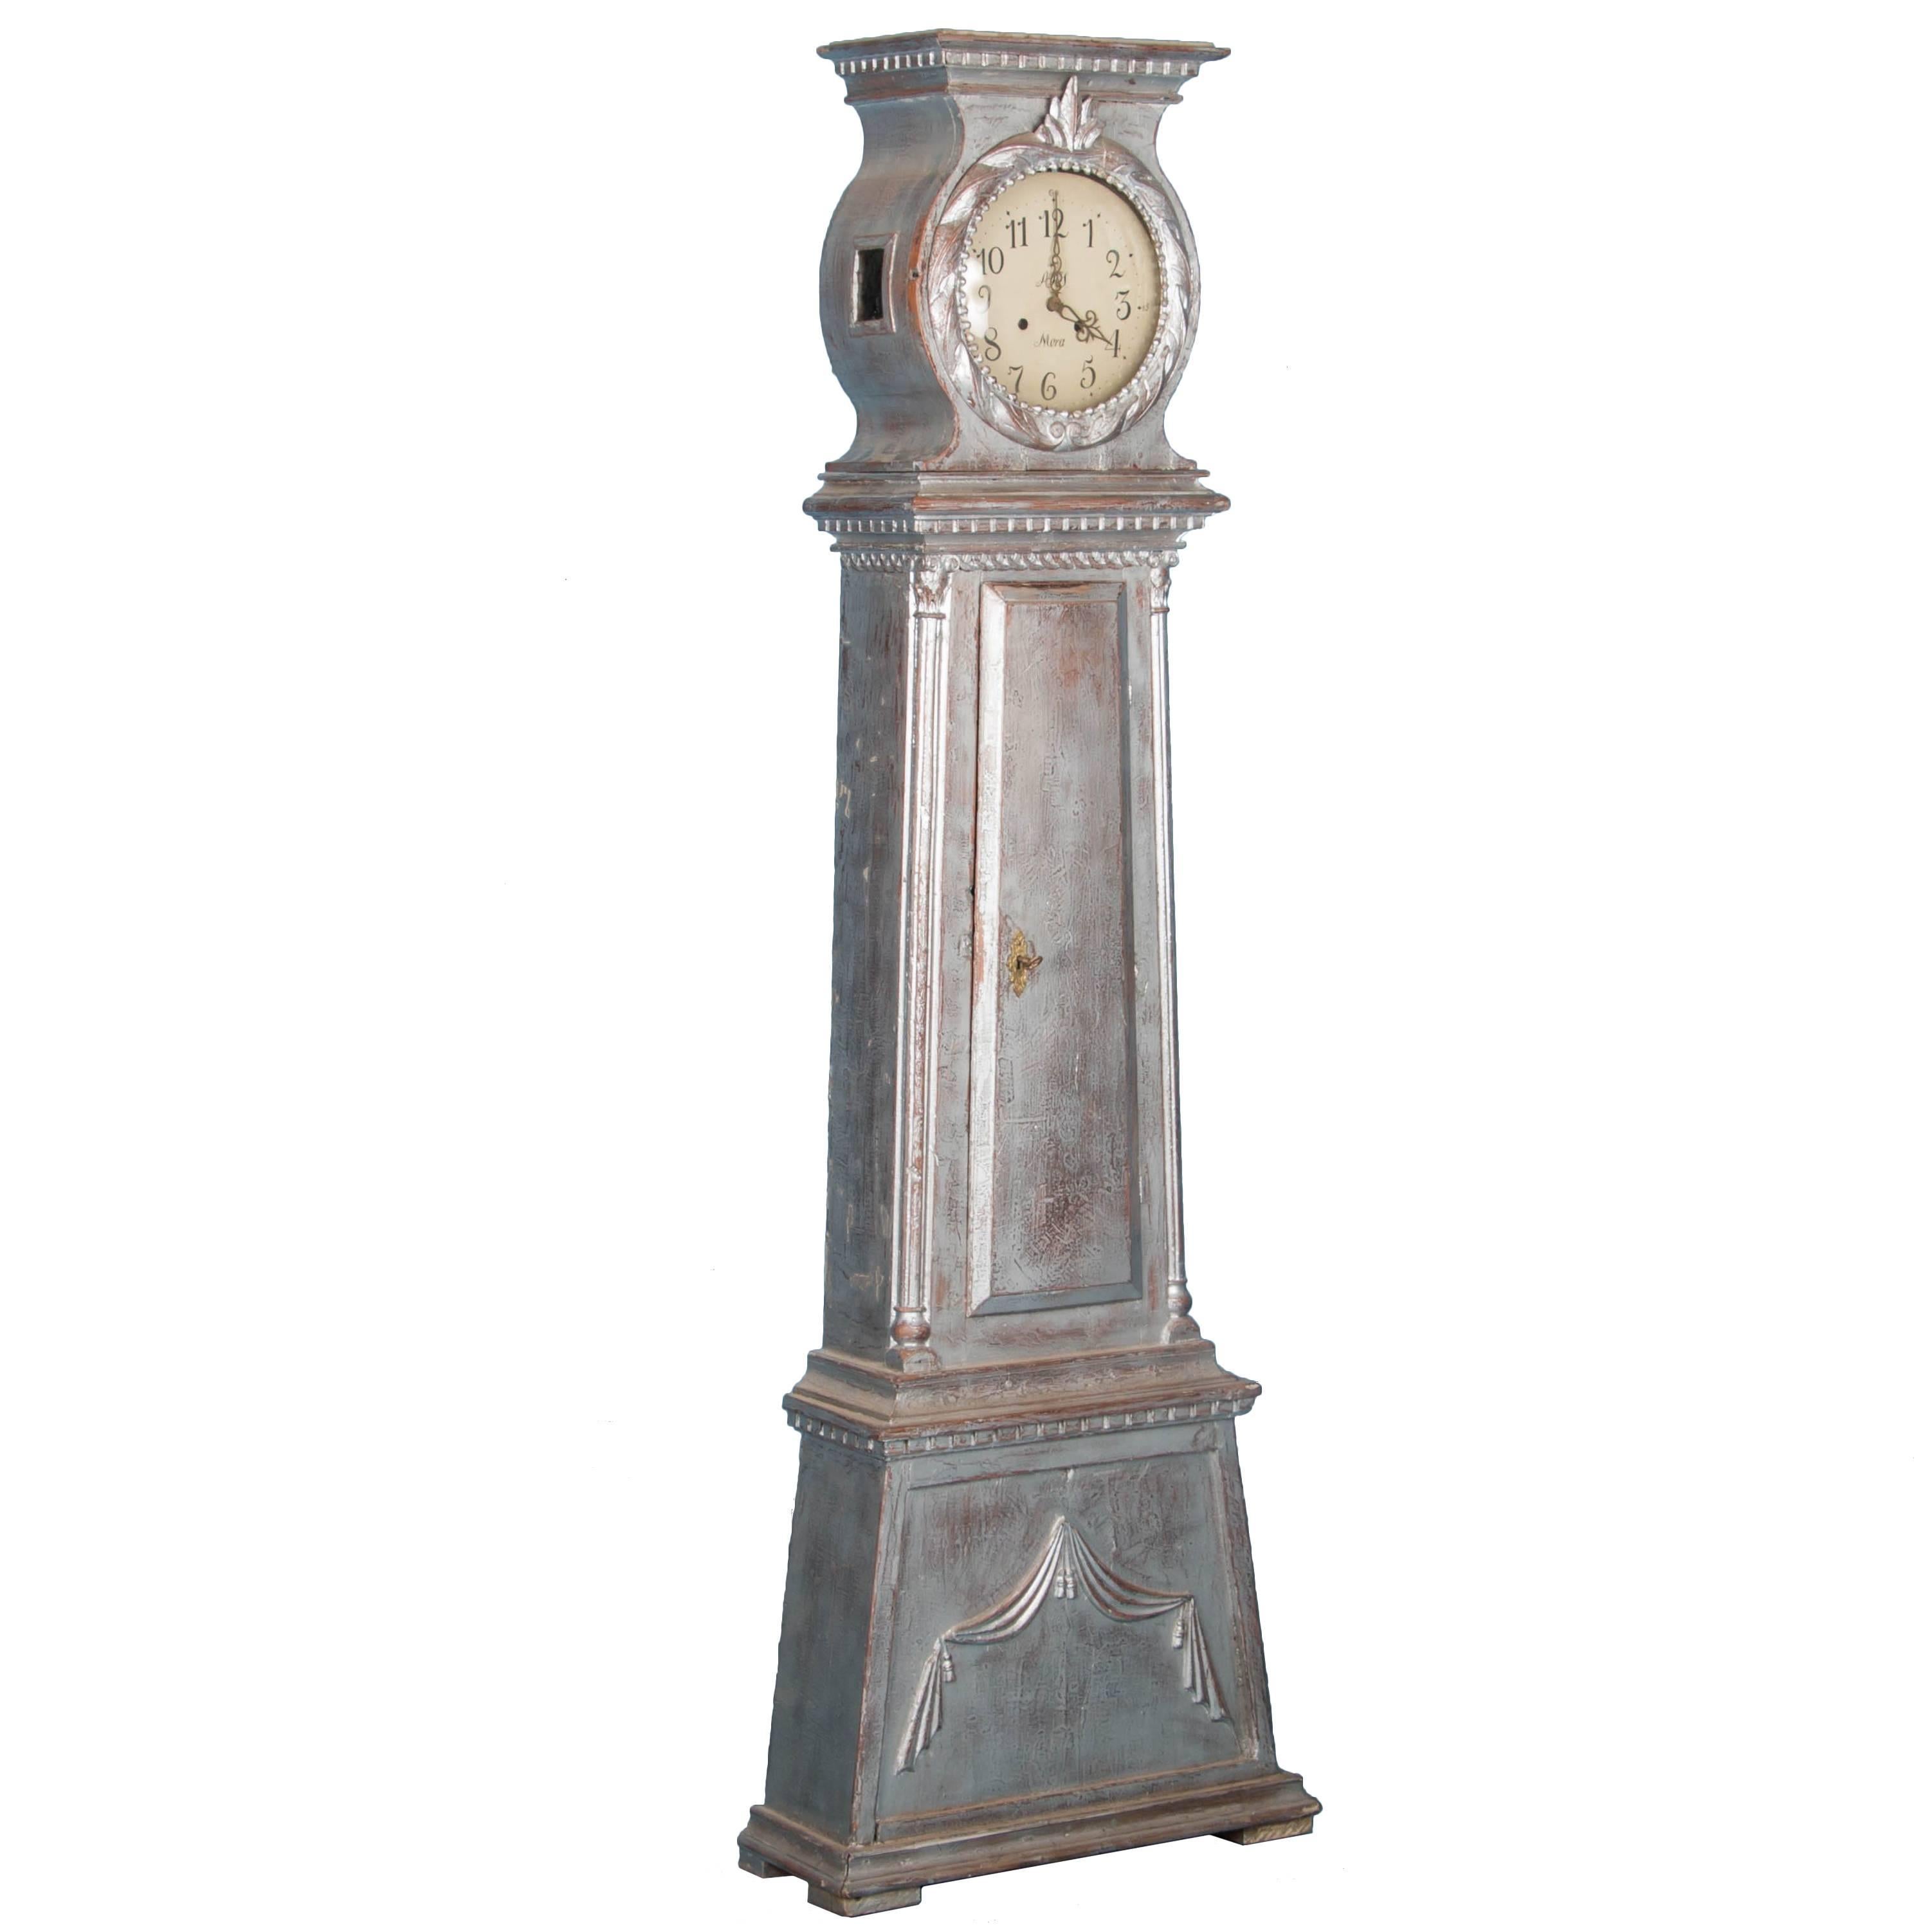 Antique Danish Grandfather Clock With Silver Paint